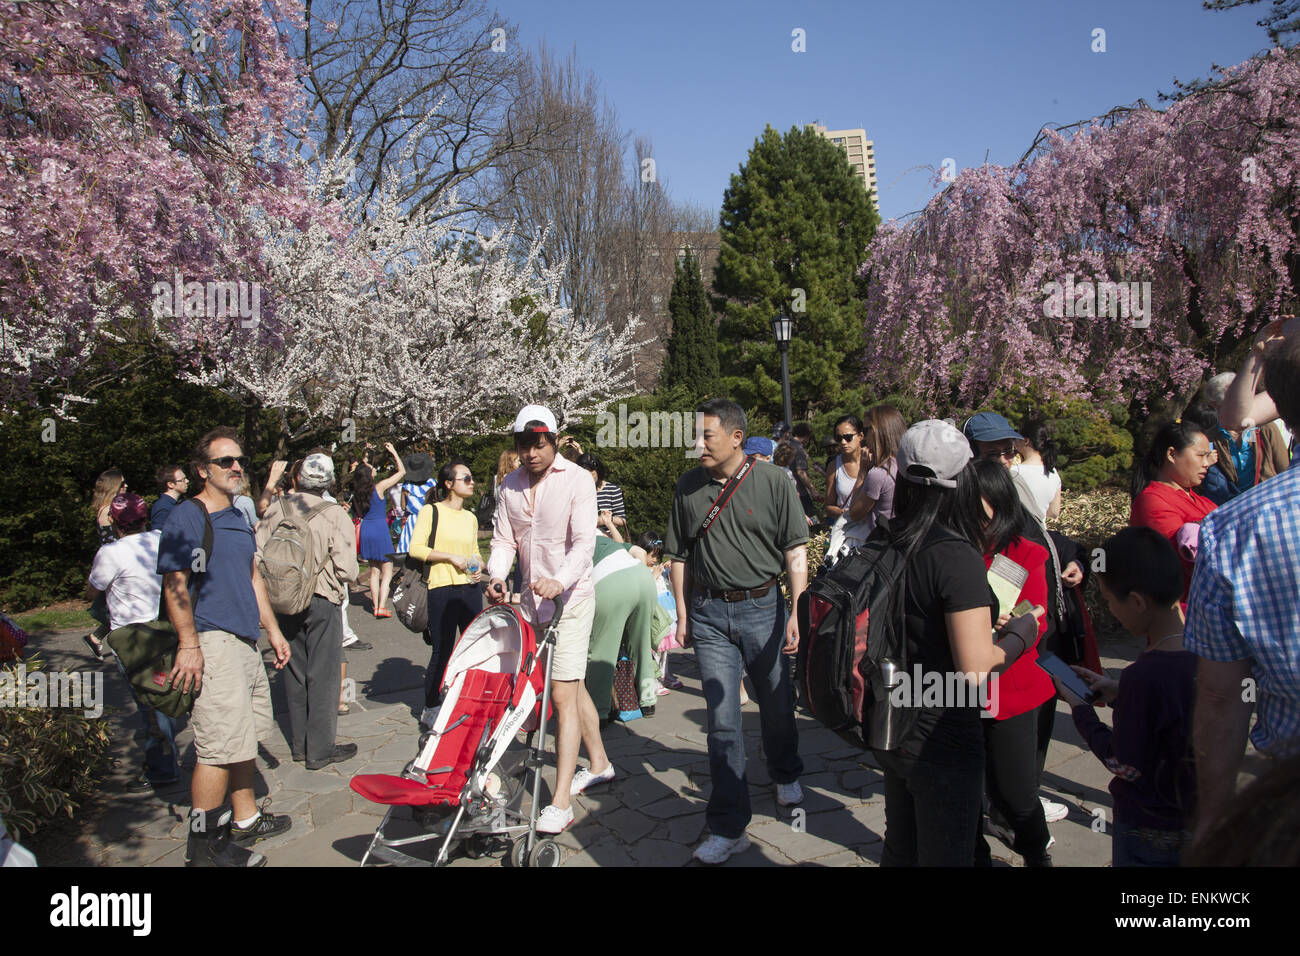 Spring time at the Brooklyn Botanic Garden with the blooming Magnolias in the background. Stock Photo